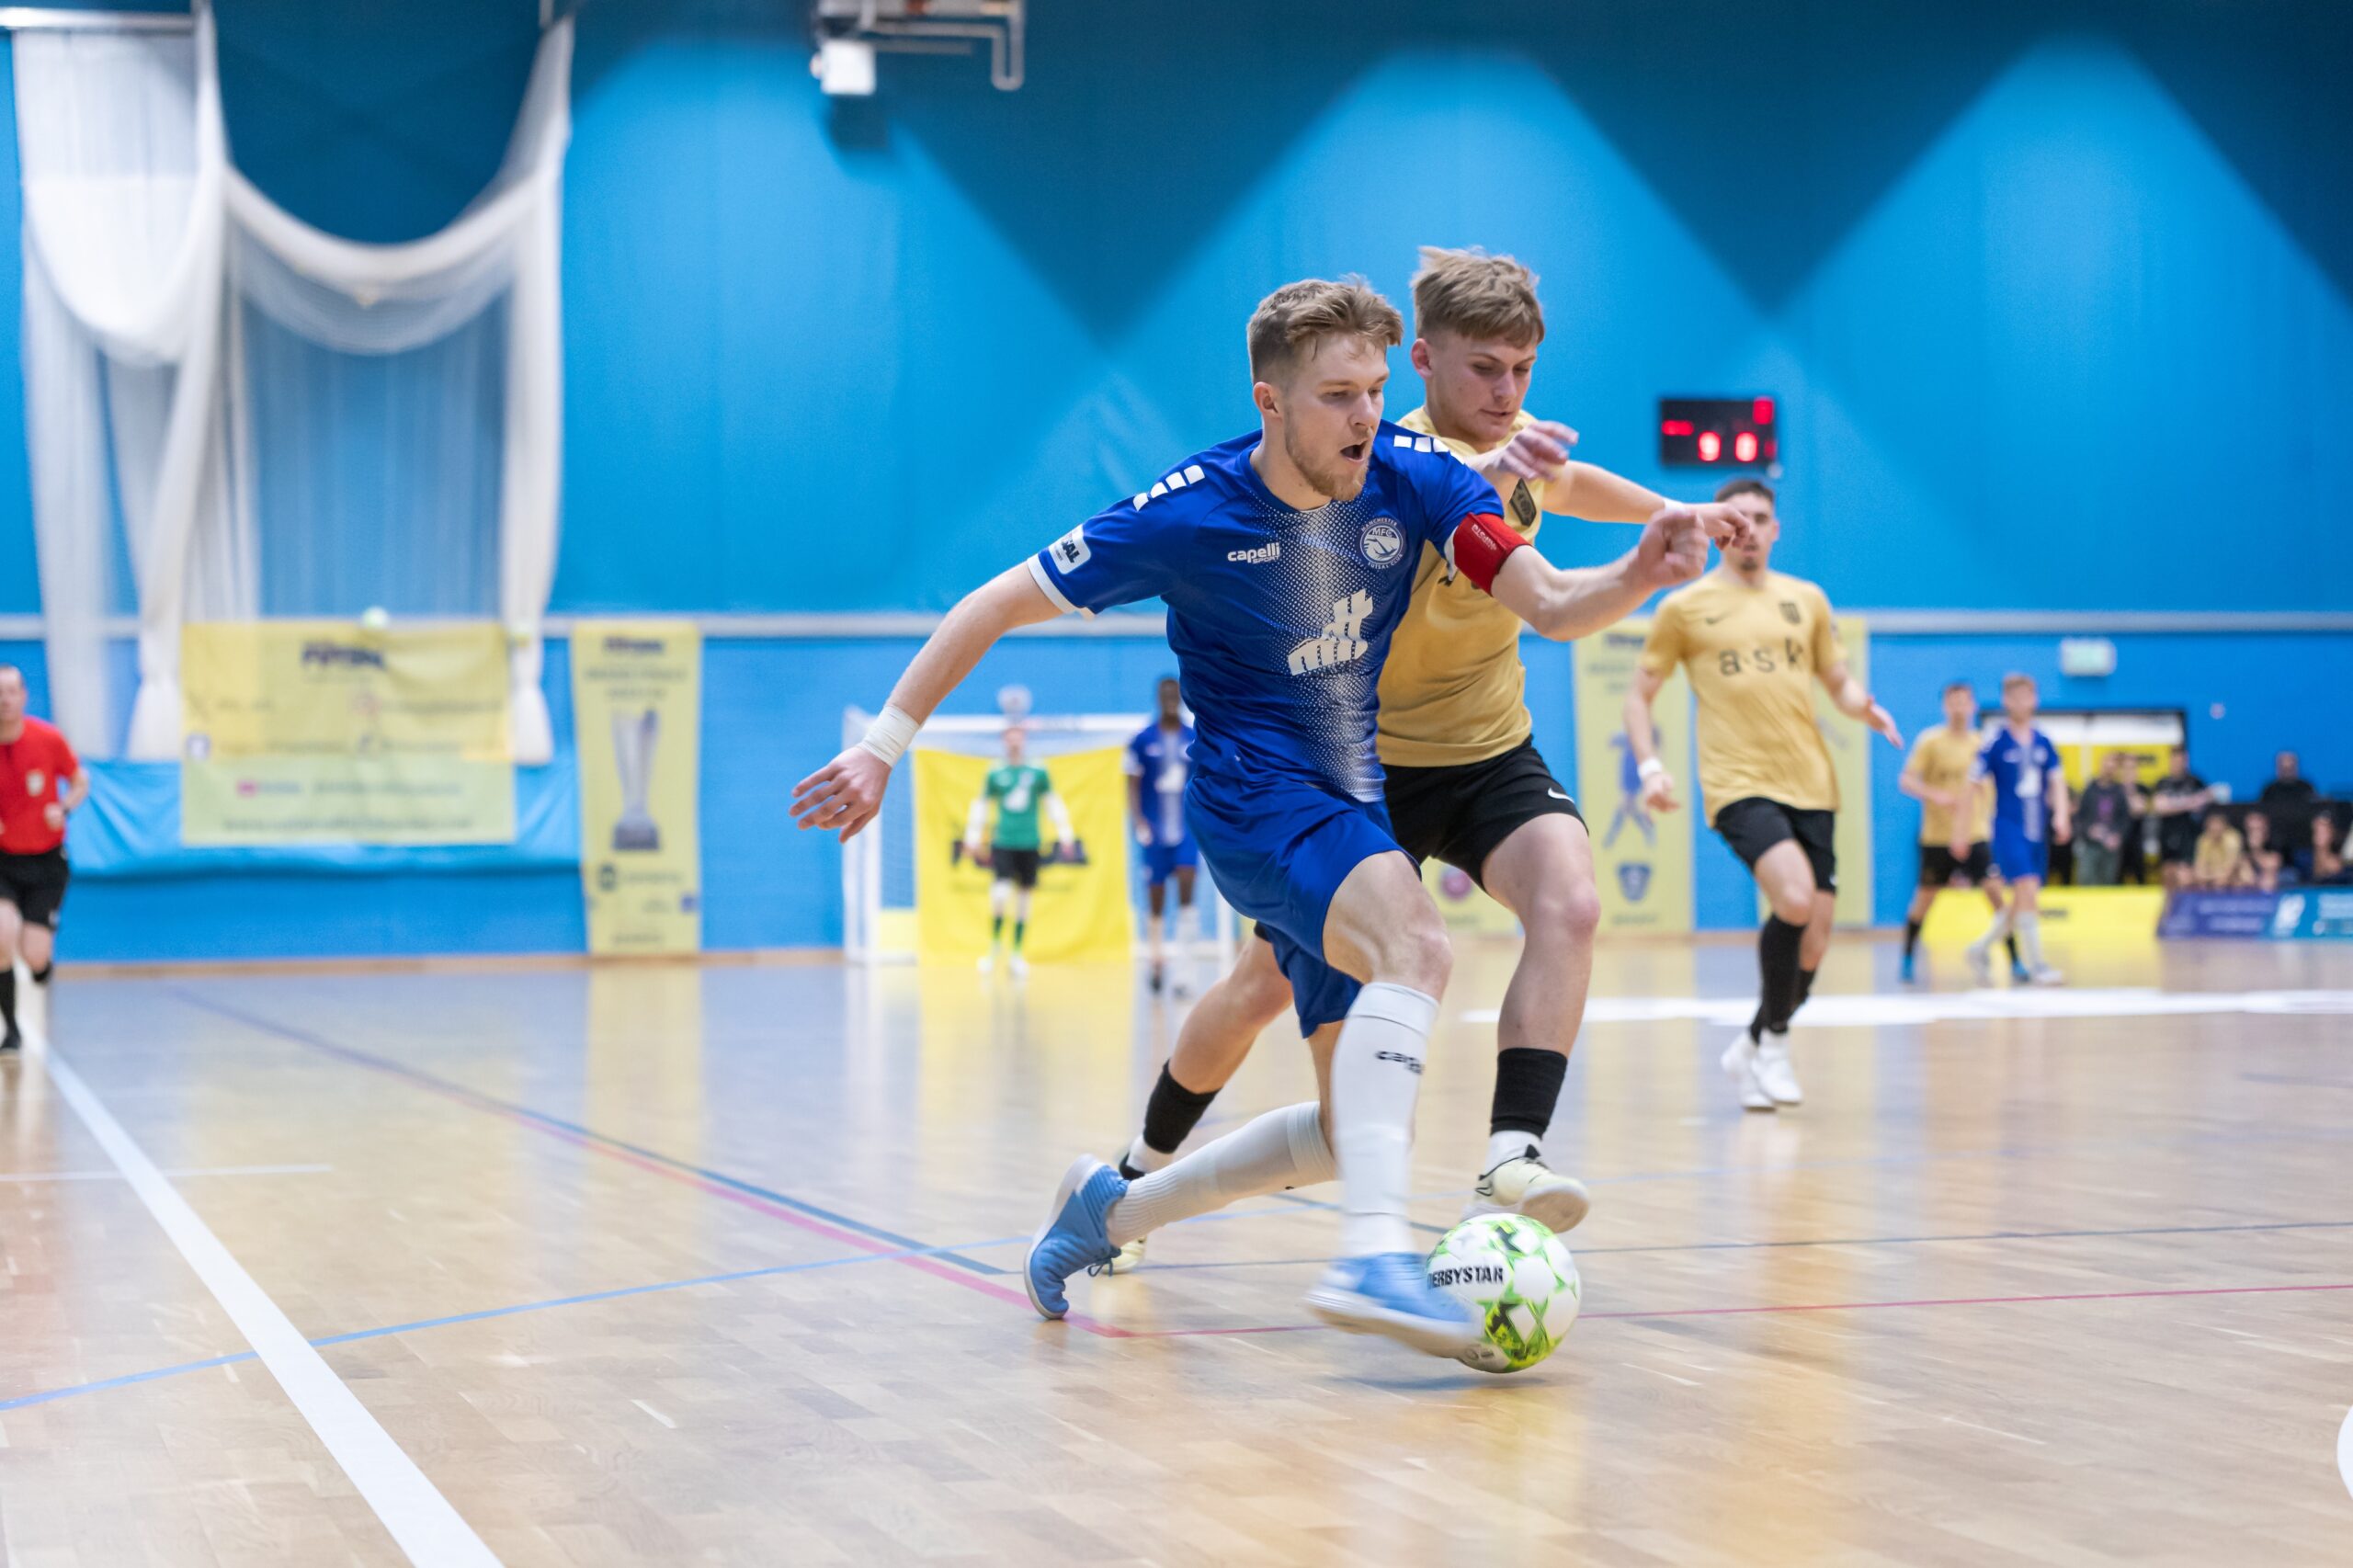 Manchester Secures Historic UEFA Futsal Champions League Spot with National Final Win